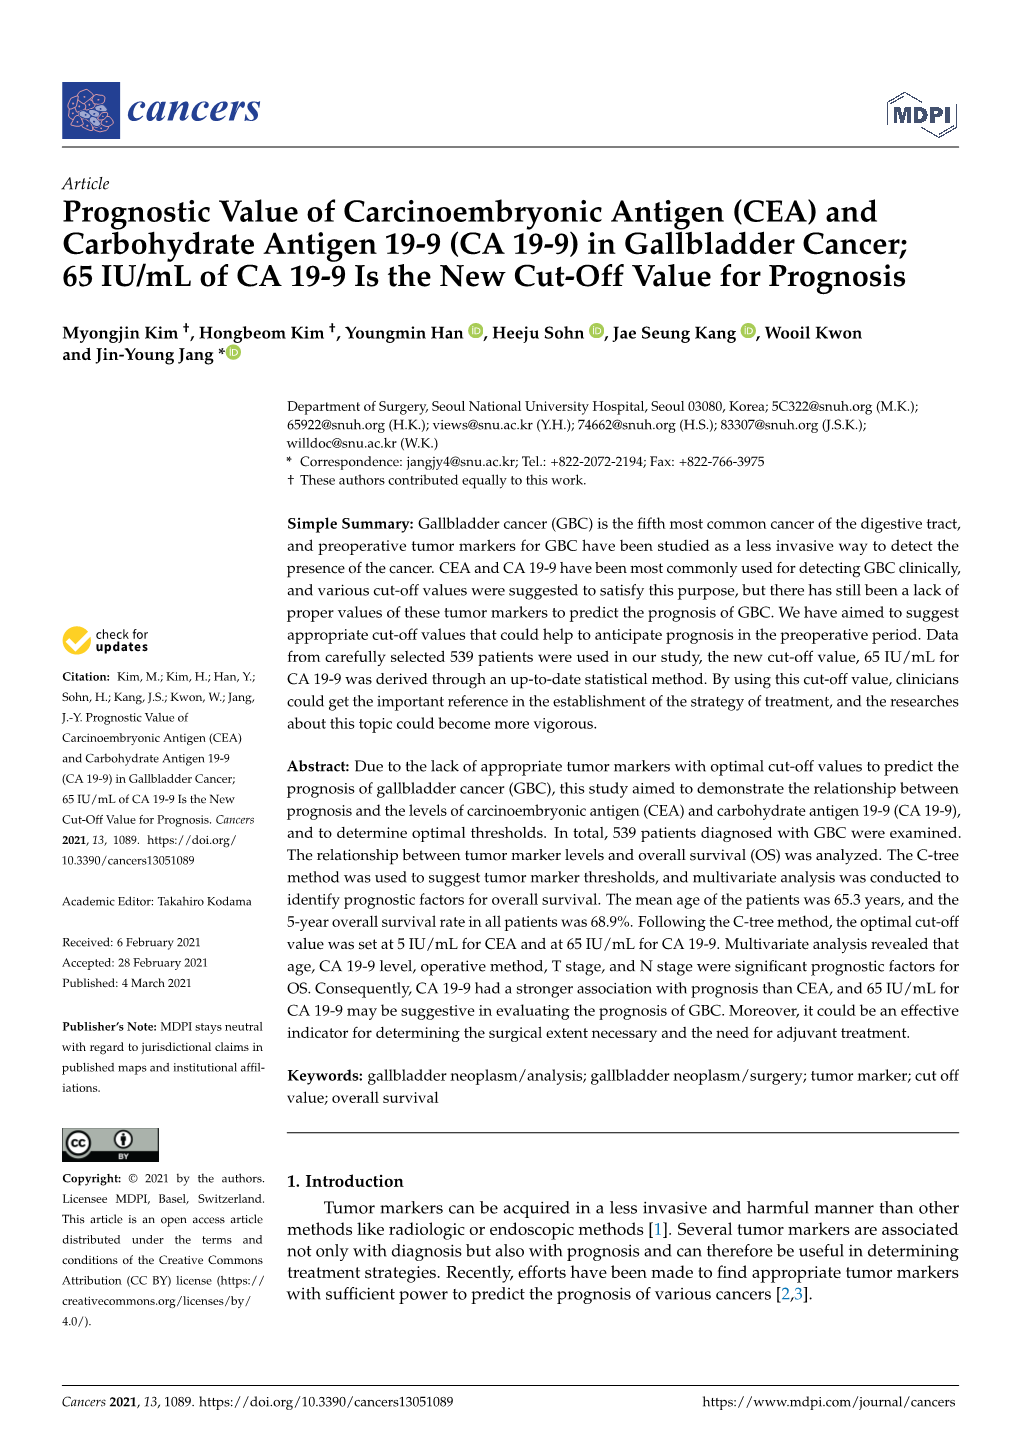 In Gallbladder Cancer; 65 IU/Ml of CA 19-9 Is the New Cut-Off Value for Prognosis